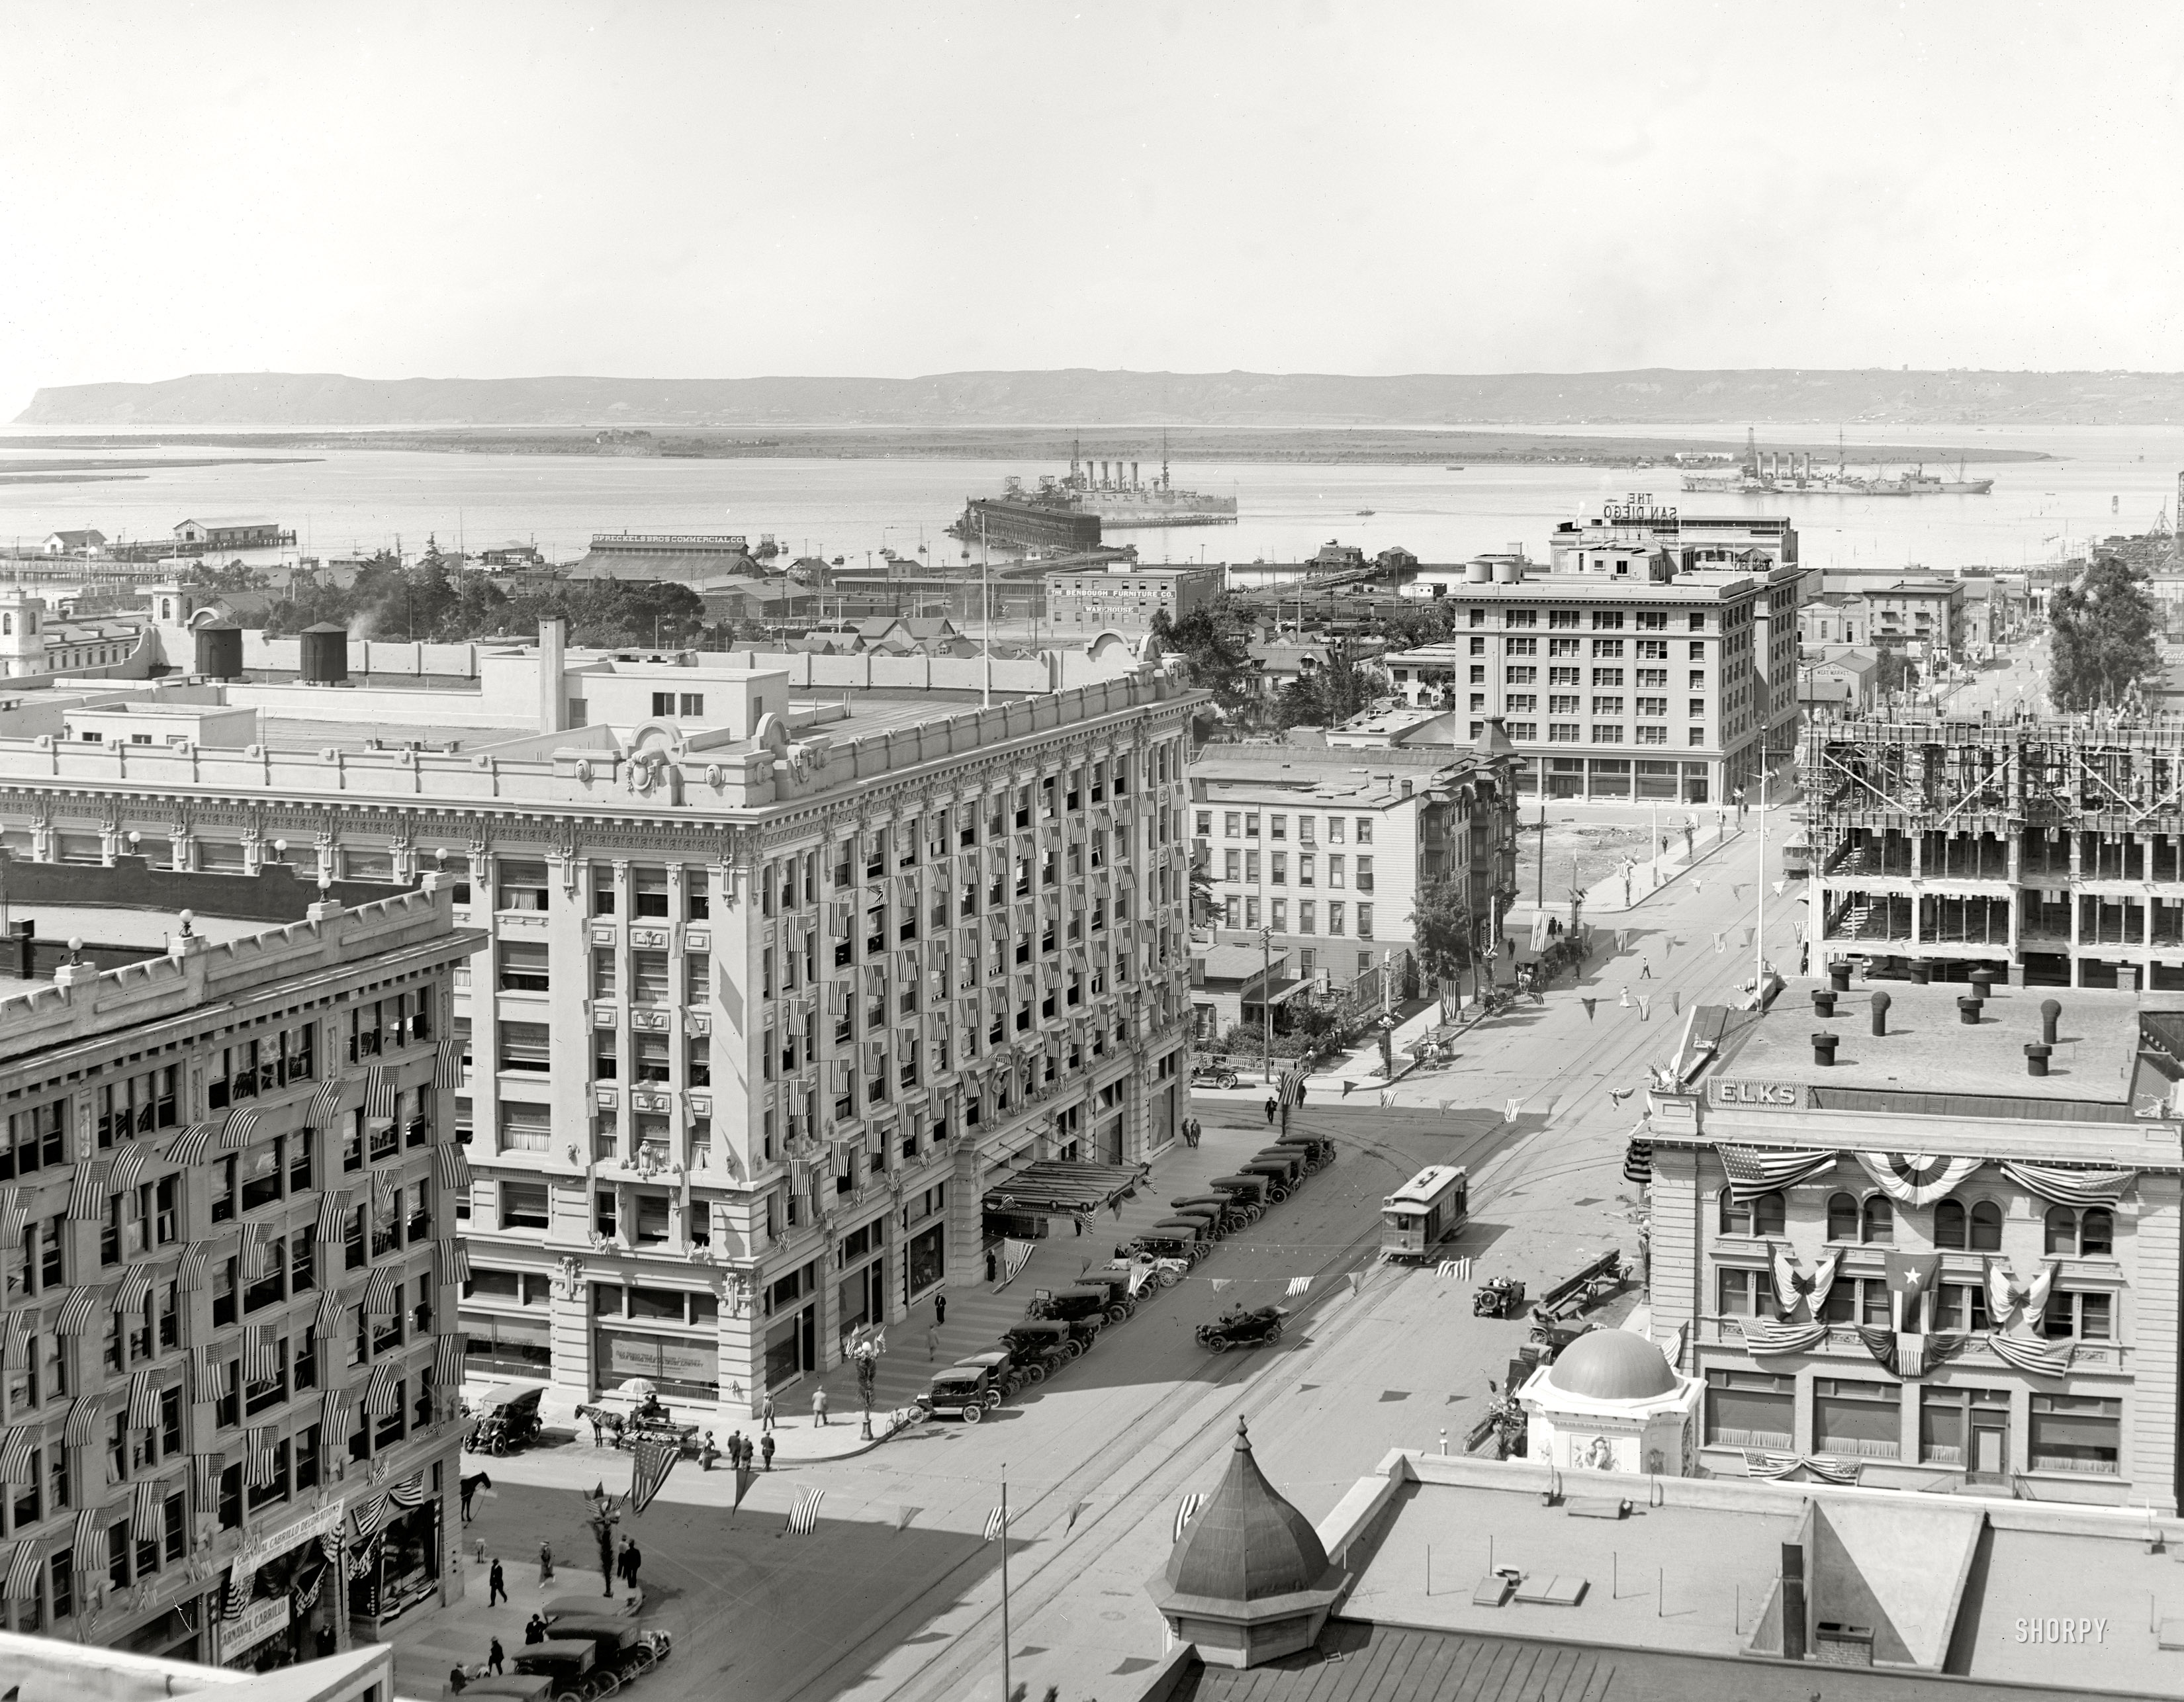 San Diego, California, 1913. "San Diego and bay from U.S. Grant Hotel." 8x10 inch dry plate glass negative, Detroit Publishing Company. View full size.